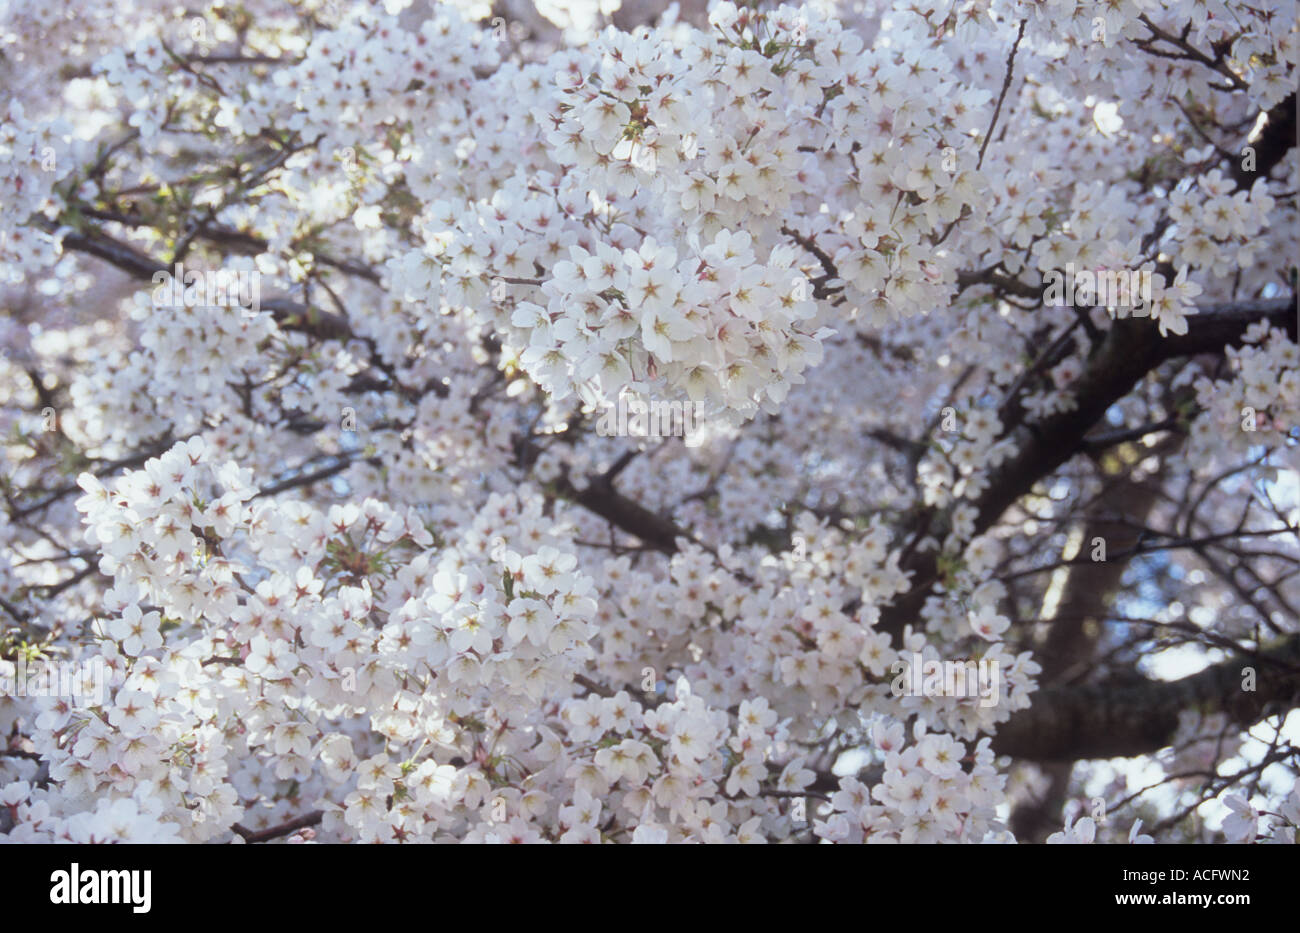 Close up of clusters of the early spring white flowers of the Flowering Fuji cherry or Prunus incisa tree Stock Photo